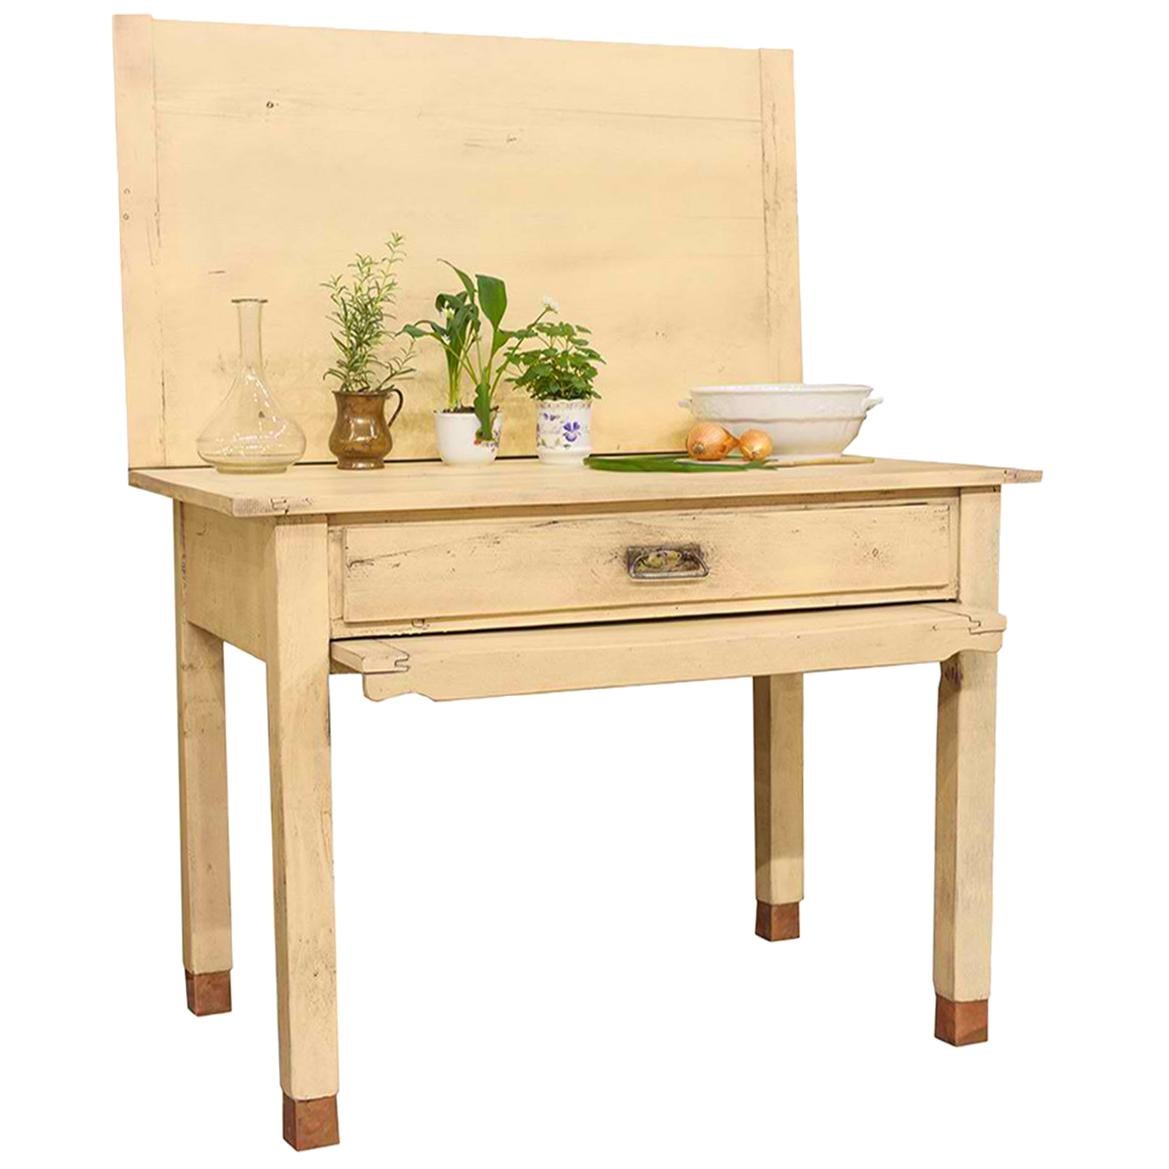 Rustic Painted Pine Table For Sale